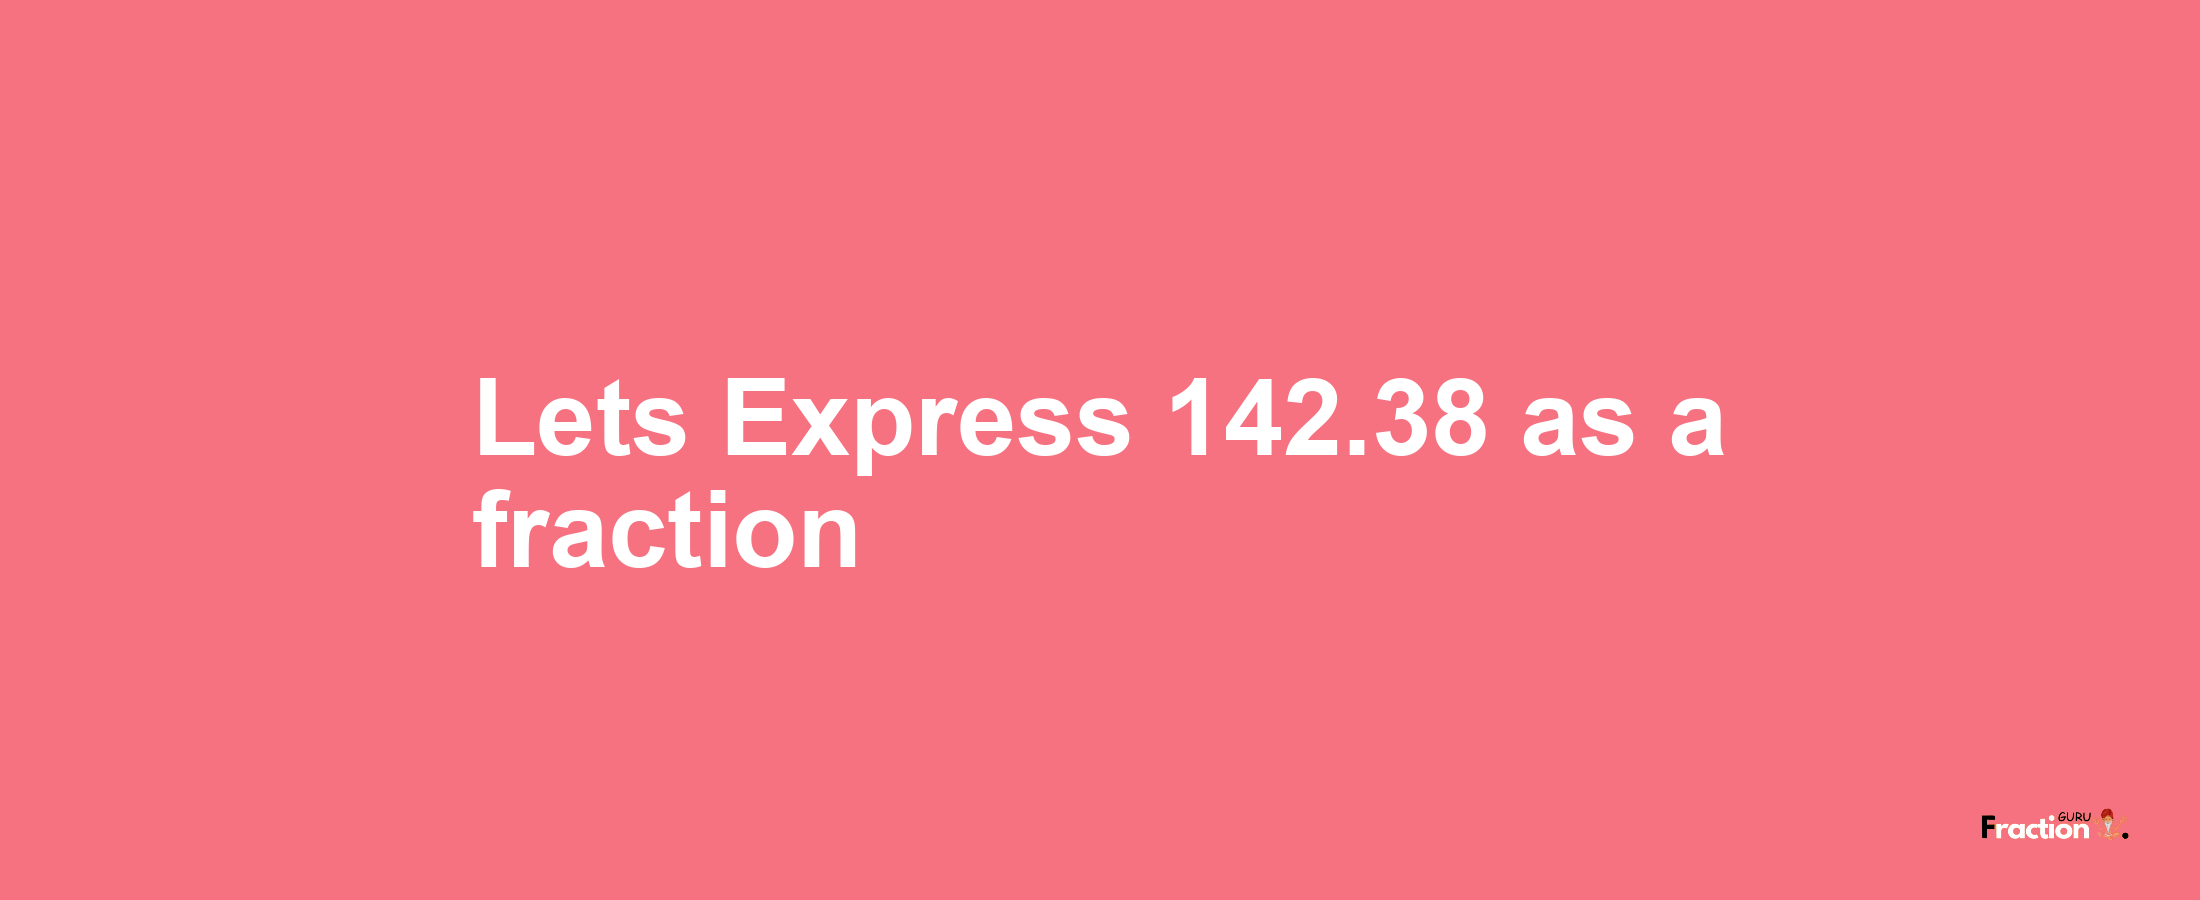 Lets Express 142.38 as afraction